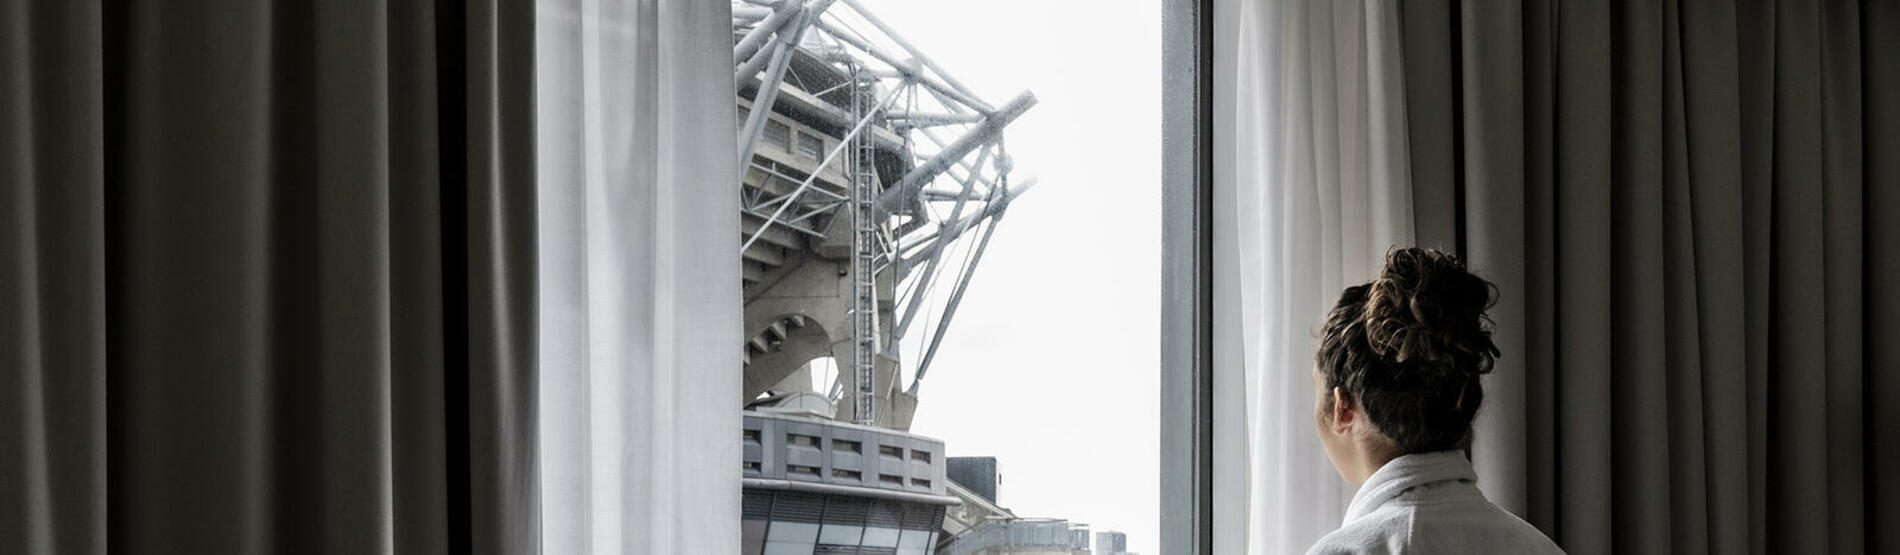 Looking out The Croke Park Hotel room window